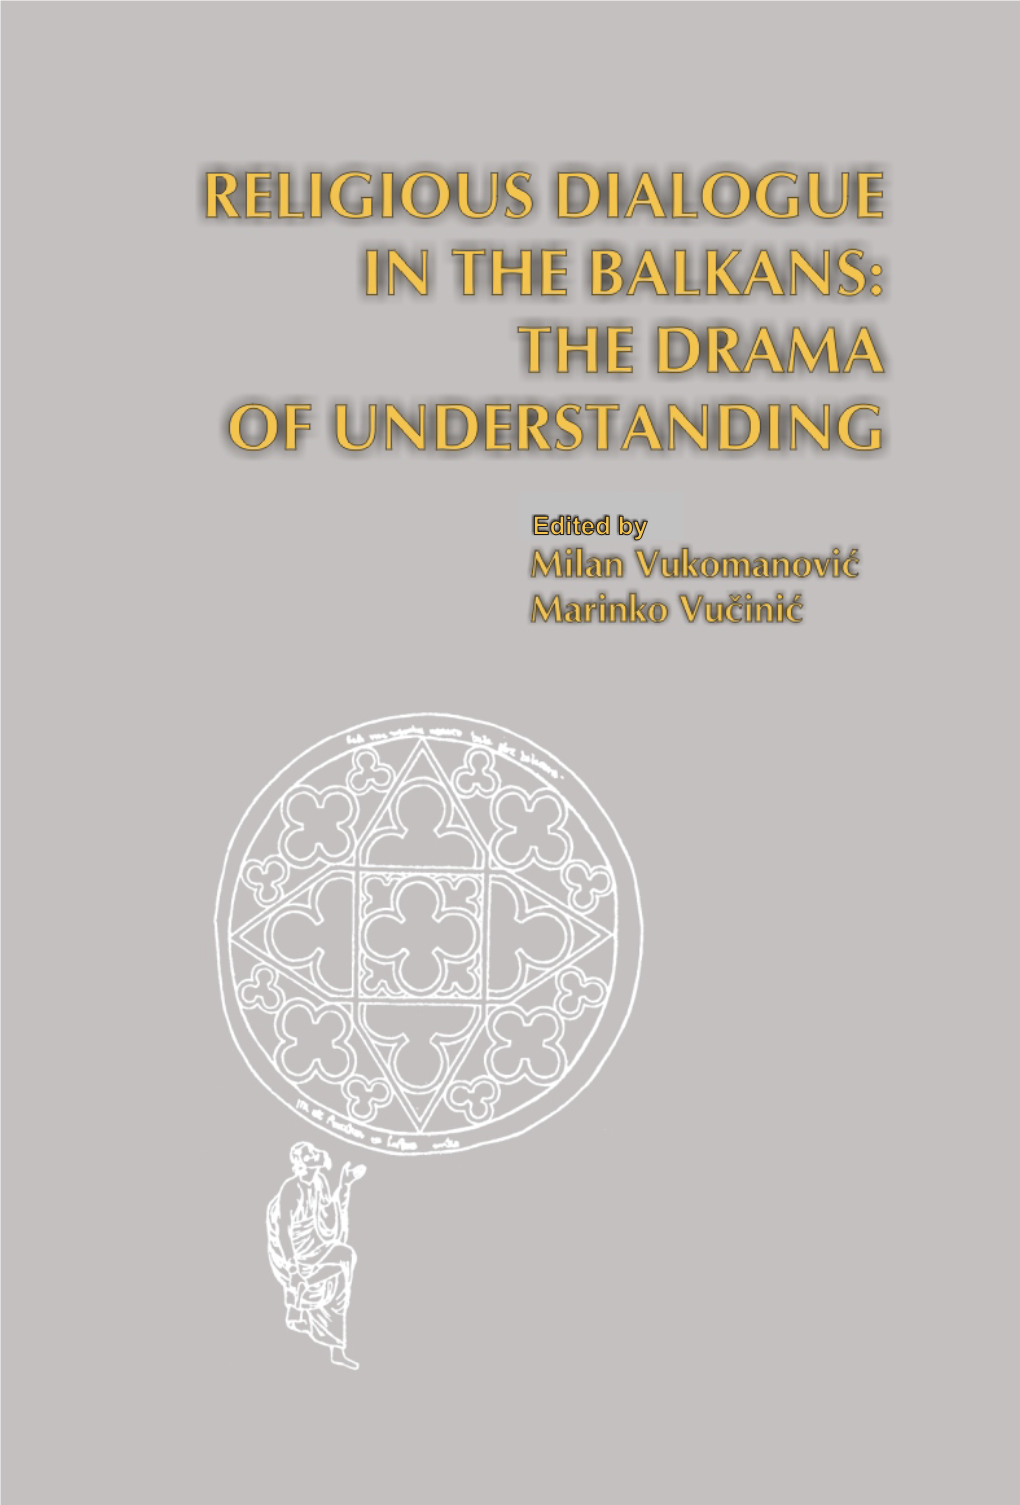 Religious Dialogue in the Balkans: the Drama of Understanding